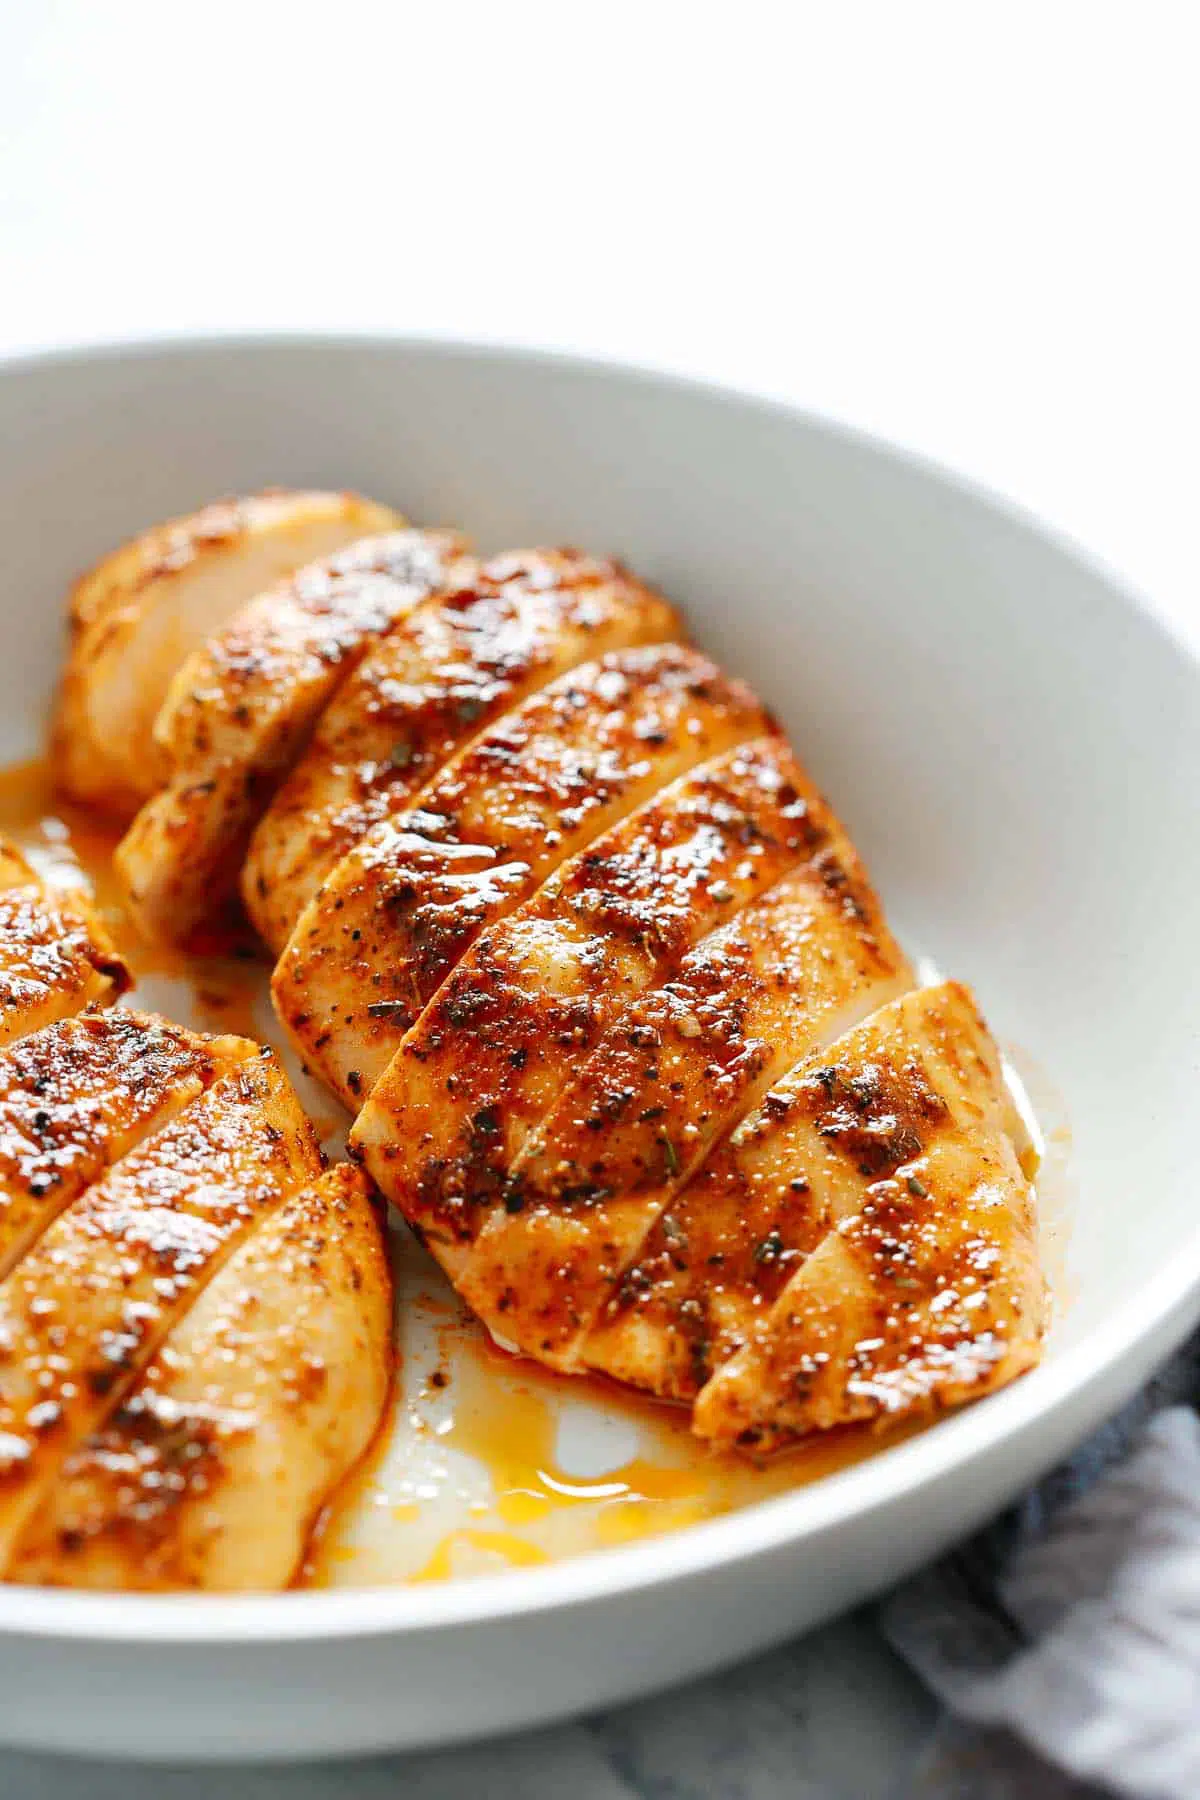 baked chicken breast, cut into slices